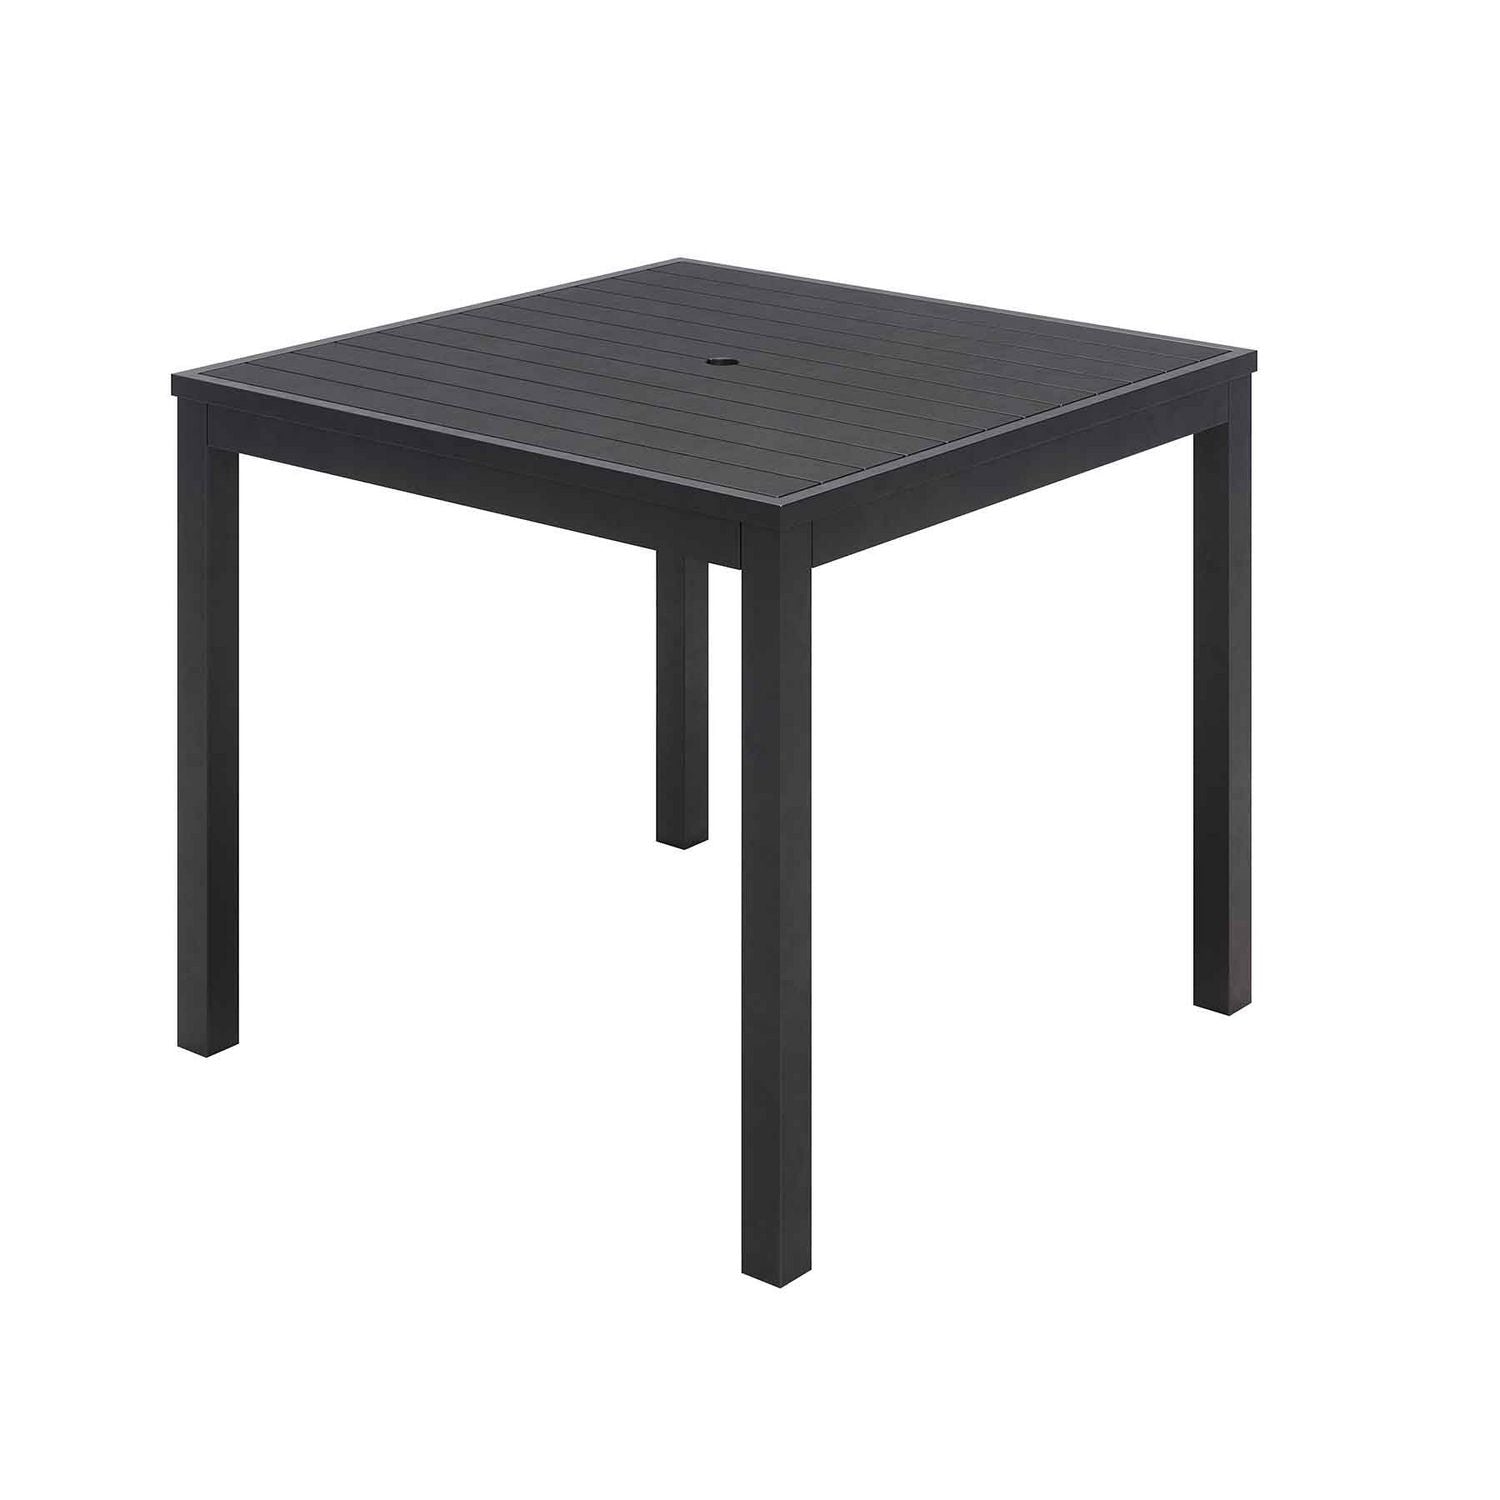 eveleen-outdoor-patio-table-with-six-black-powder-coated-polymer-chairs-32-x-55-x-29-black-ships-in-4-6-business-days_kfi840031925244 - 2